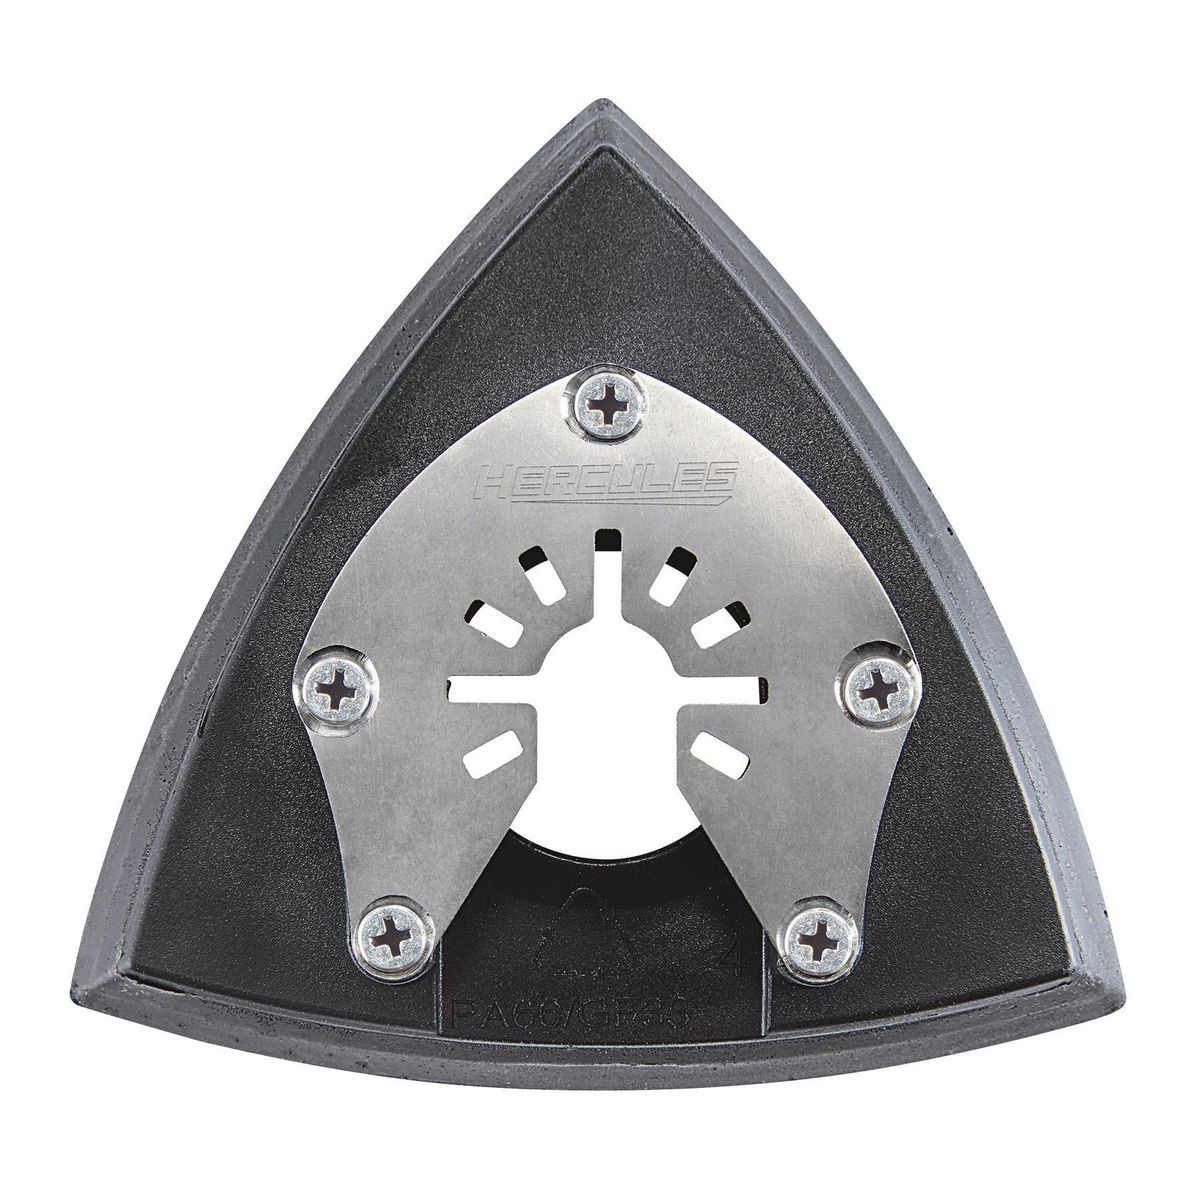 HERCULES Triangle Sanding Backing Pad for Oscillating Multi-Tools